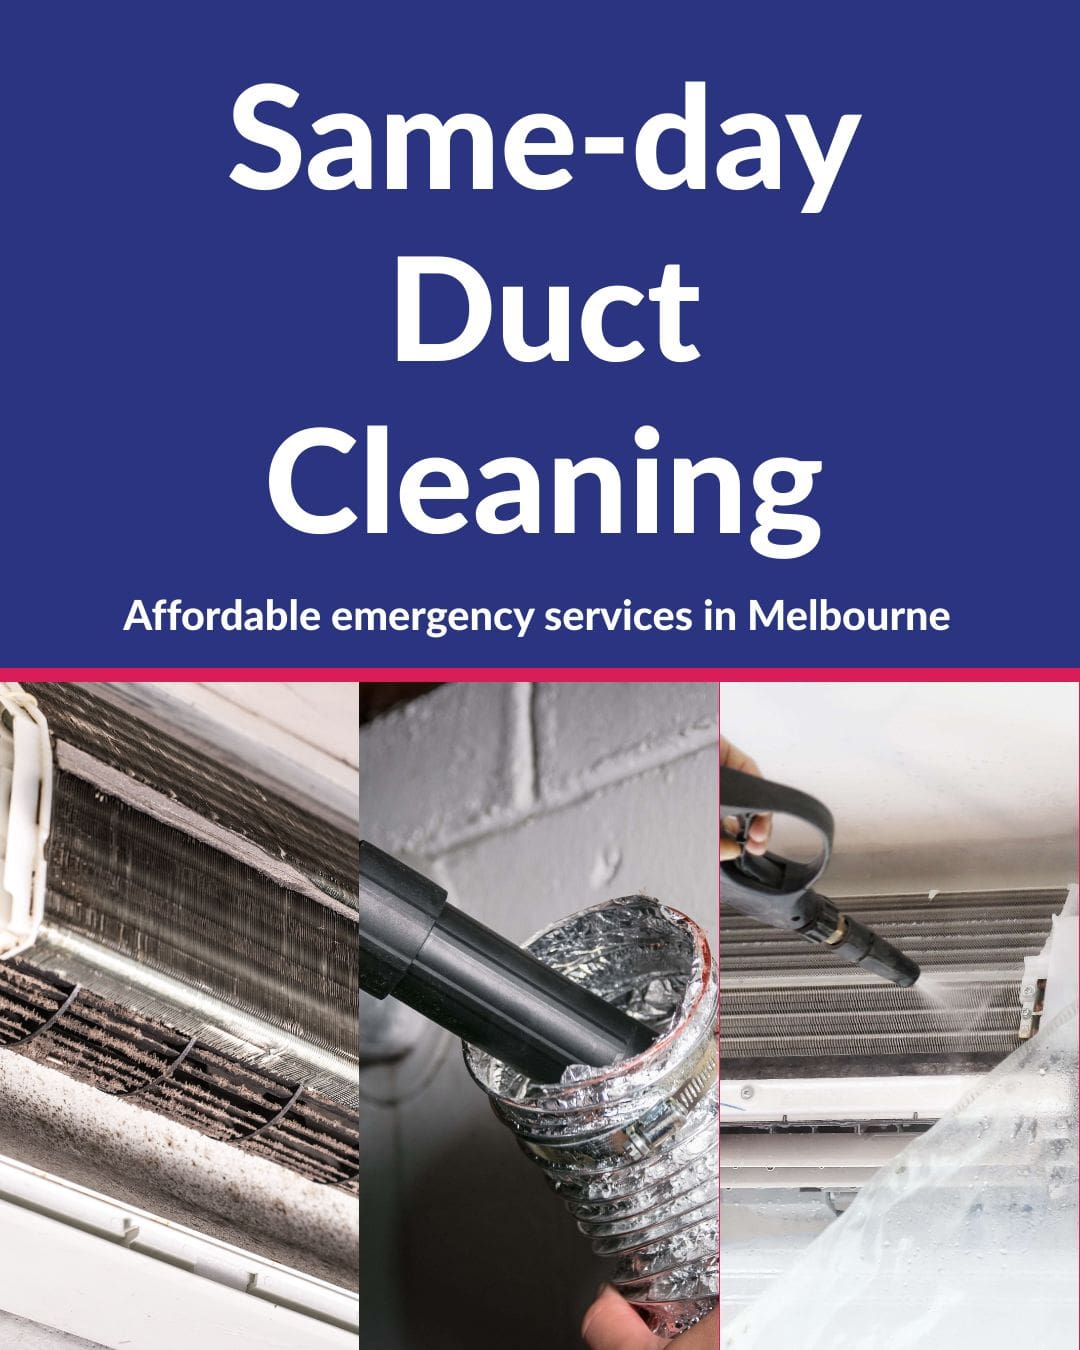 Same-day Duct Cleaning and Repair Services